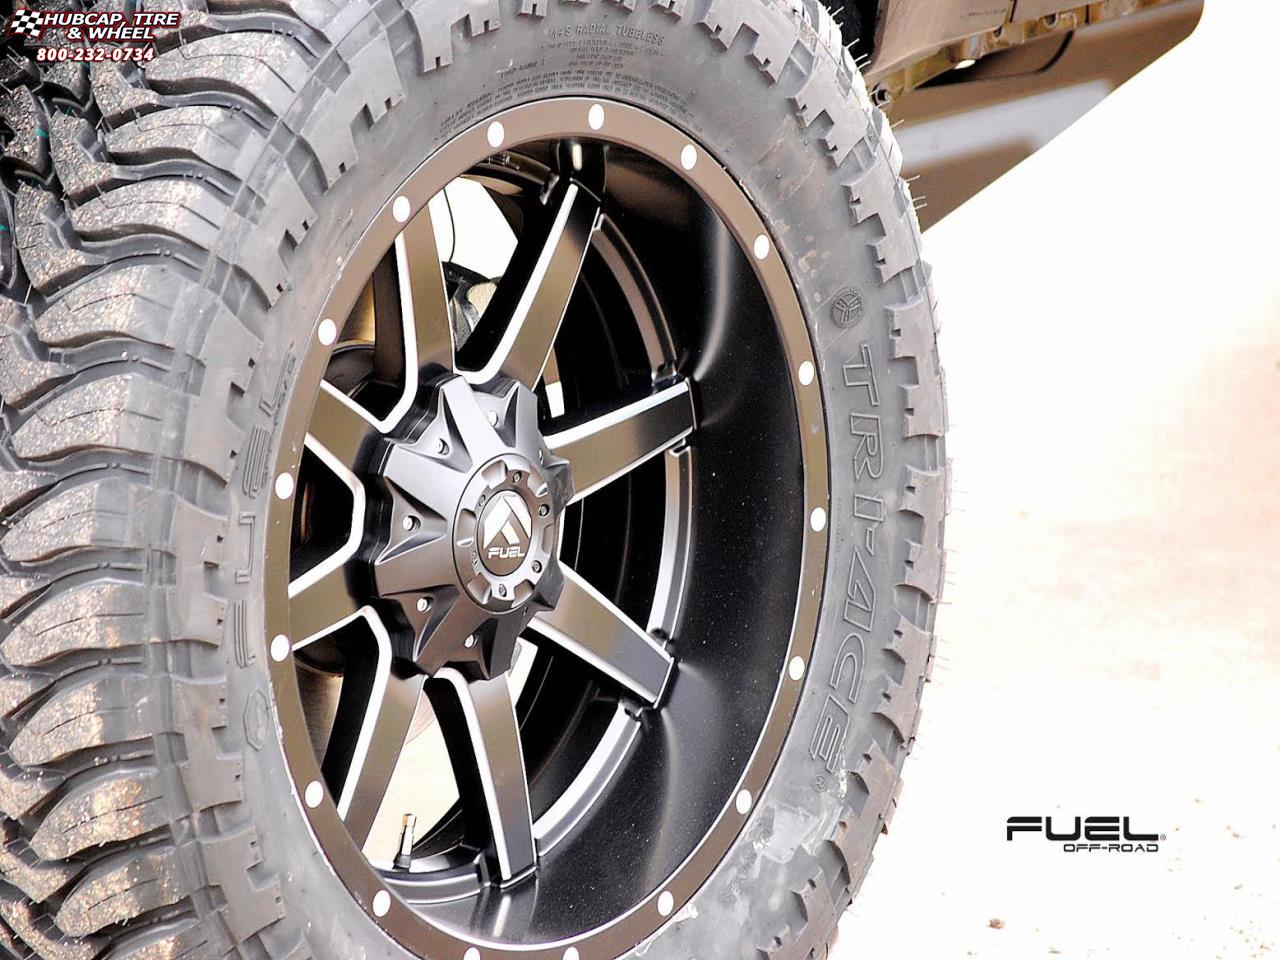 vehicle gallery/ford f 250 fuel maverick d538 0X0  Black & Milled wheels and rims